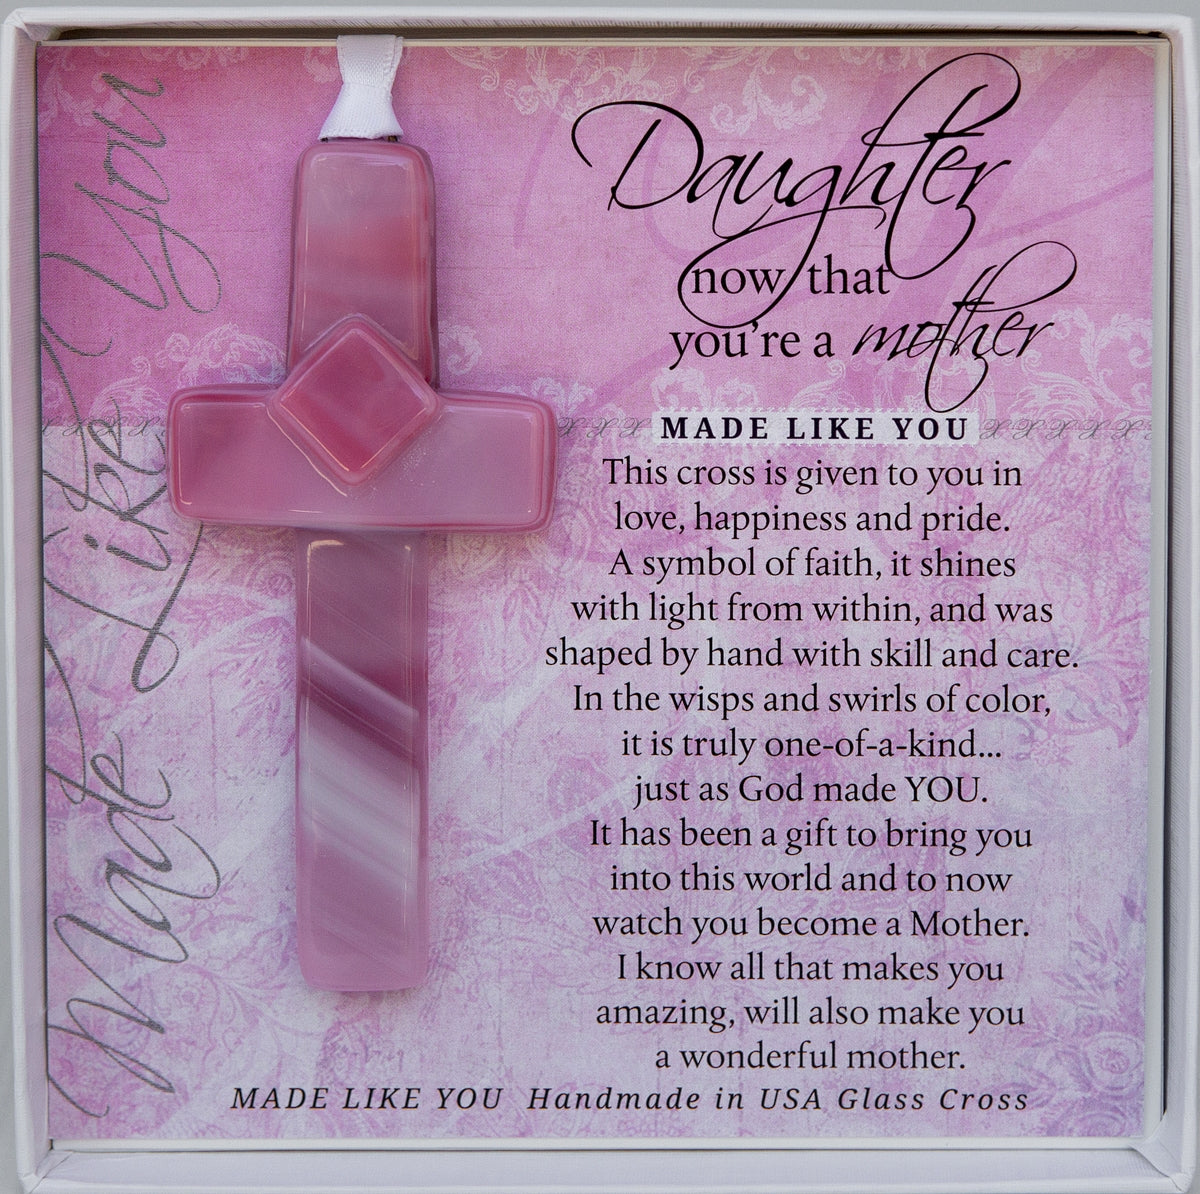 Daughter Gift - Handmade 4" pink glass cross and "Daughter, Now That You're a Mother" sentiment in white box with clear lid.